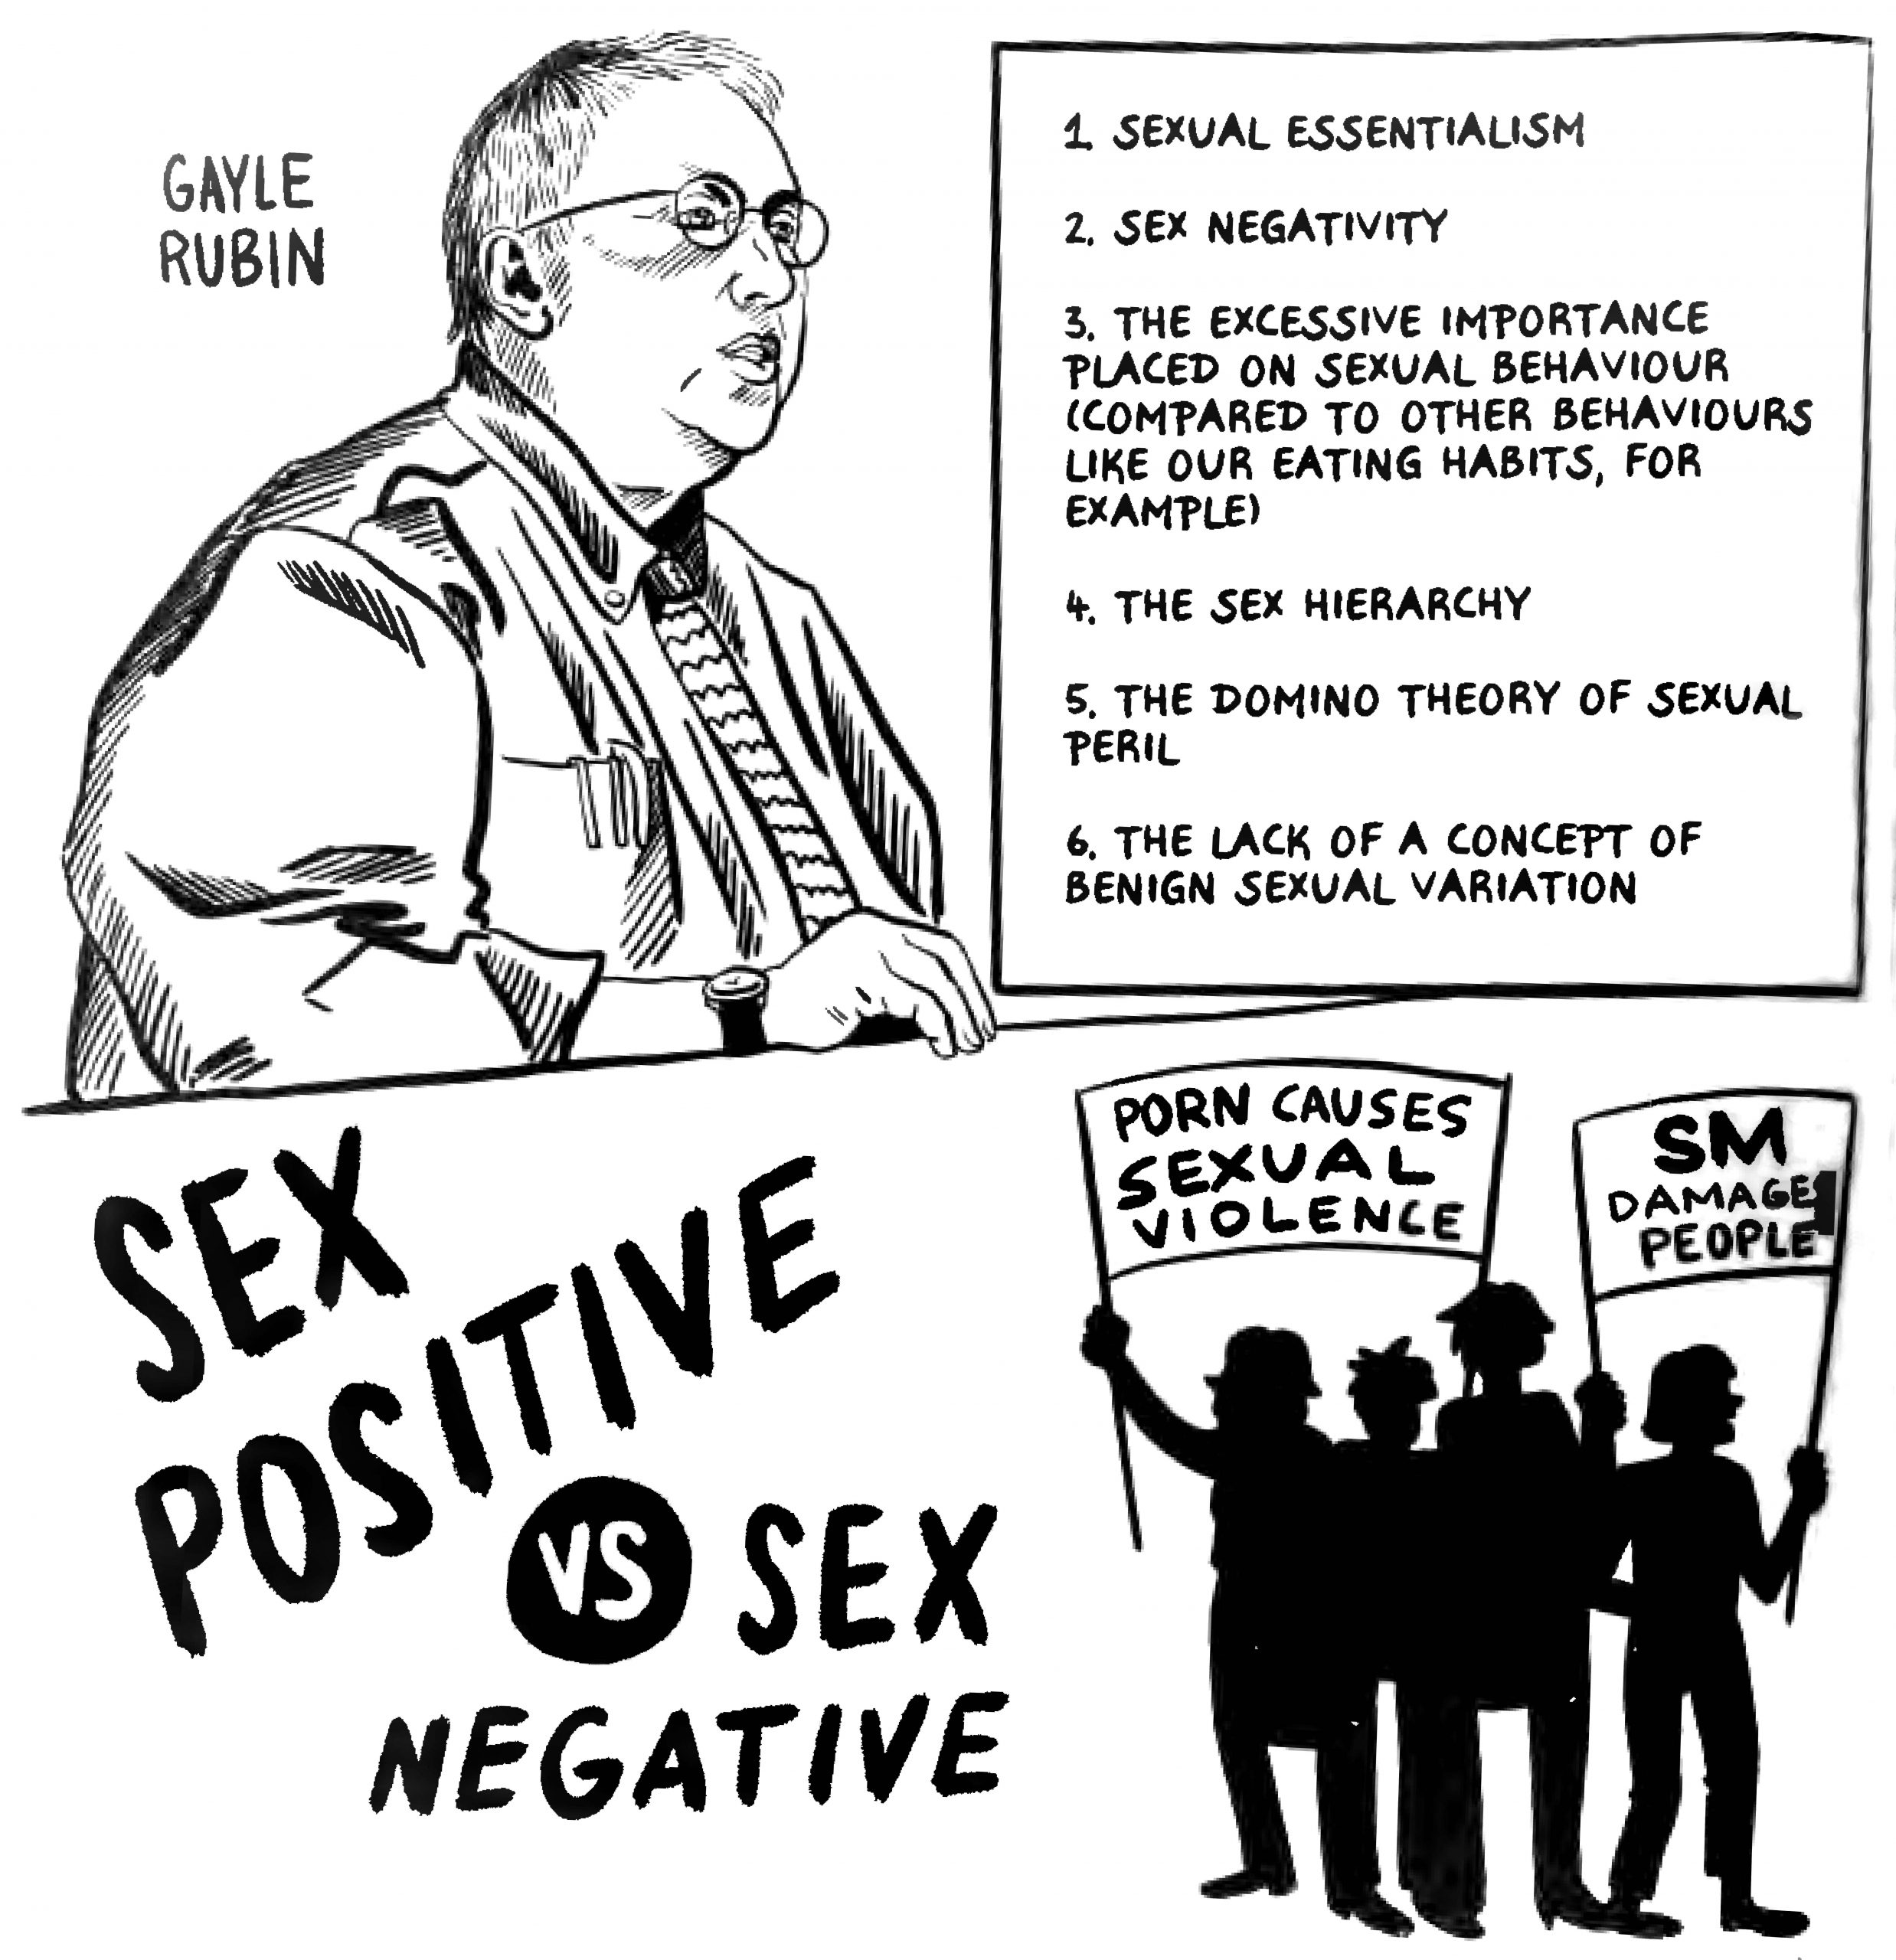 A drawing of Gayle Rubin lists "Sexual essentialism, Sex negativity, the excessive importance placed on sexual behavior (compared to other behaviours like our eating habits, for example), The sex hierarchy, the domino theory of sexual peril, and the lack of a concept of benign sexual variation." Below, silhouettes of protesters are posed next to the words "SEX POSITIVE VS SEX NEGATIVE"